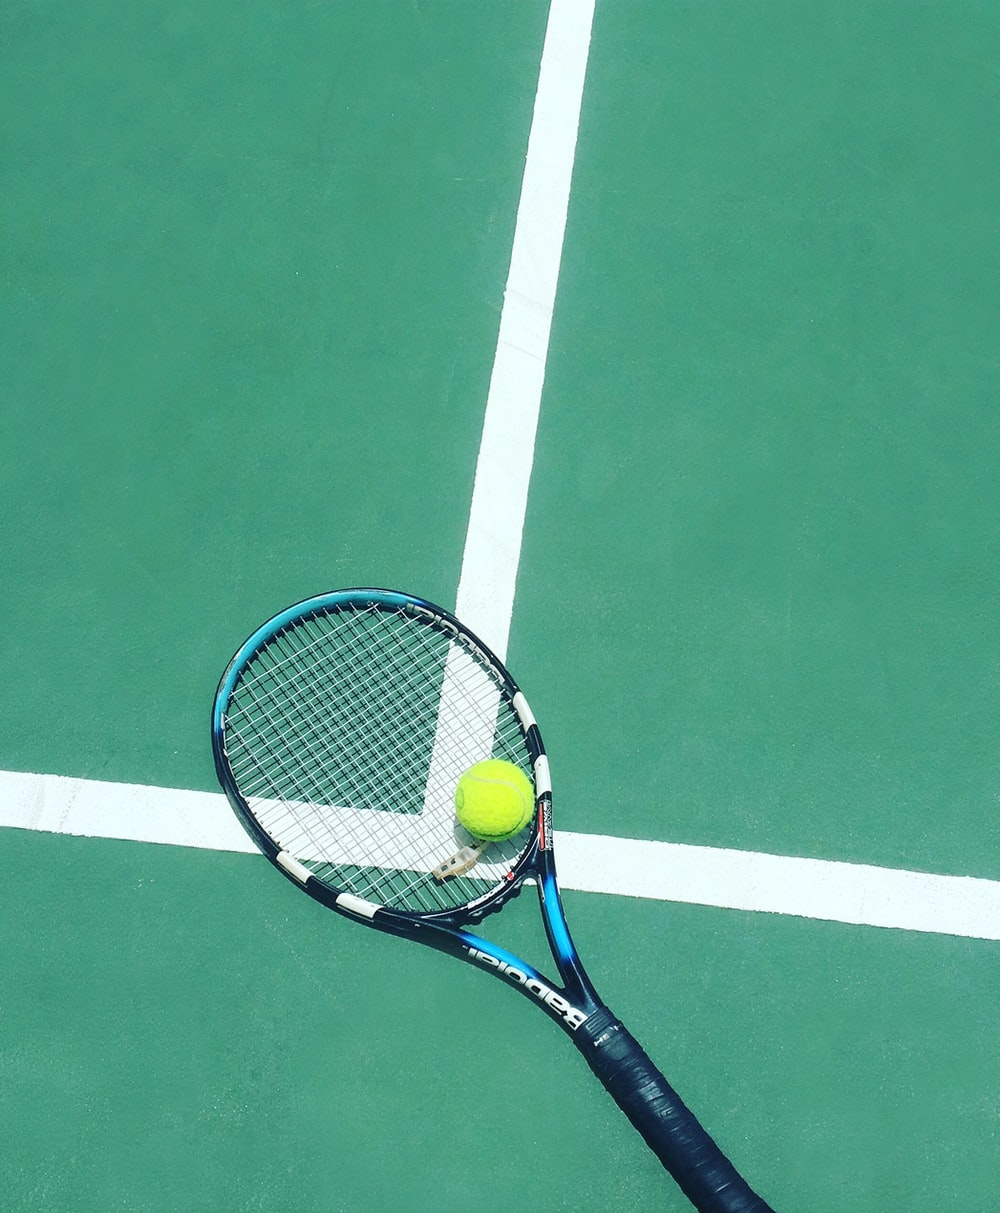 Tennis Picture. Download Free Image